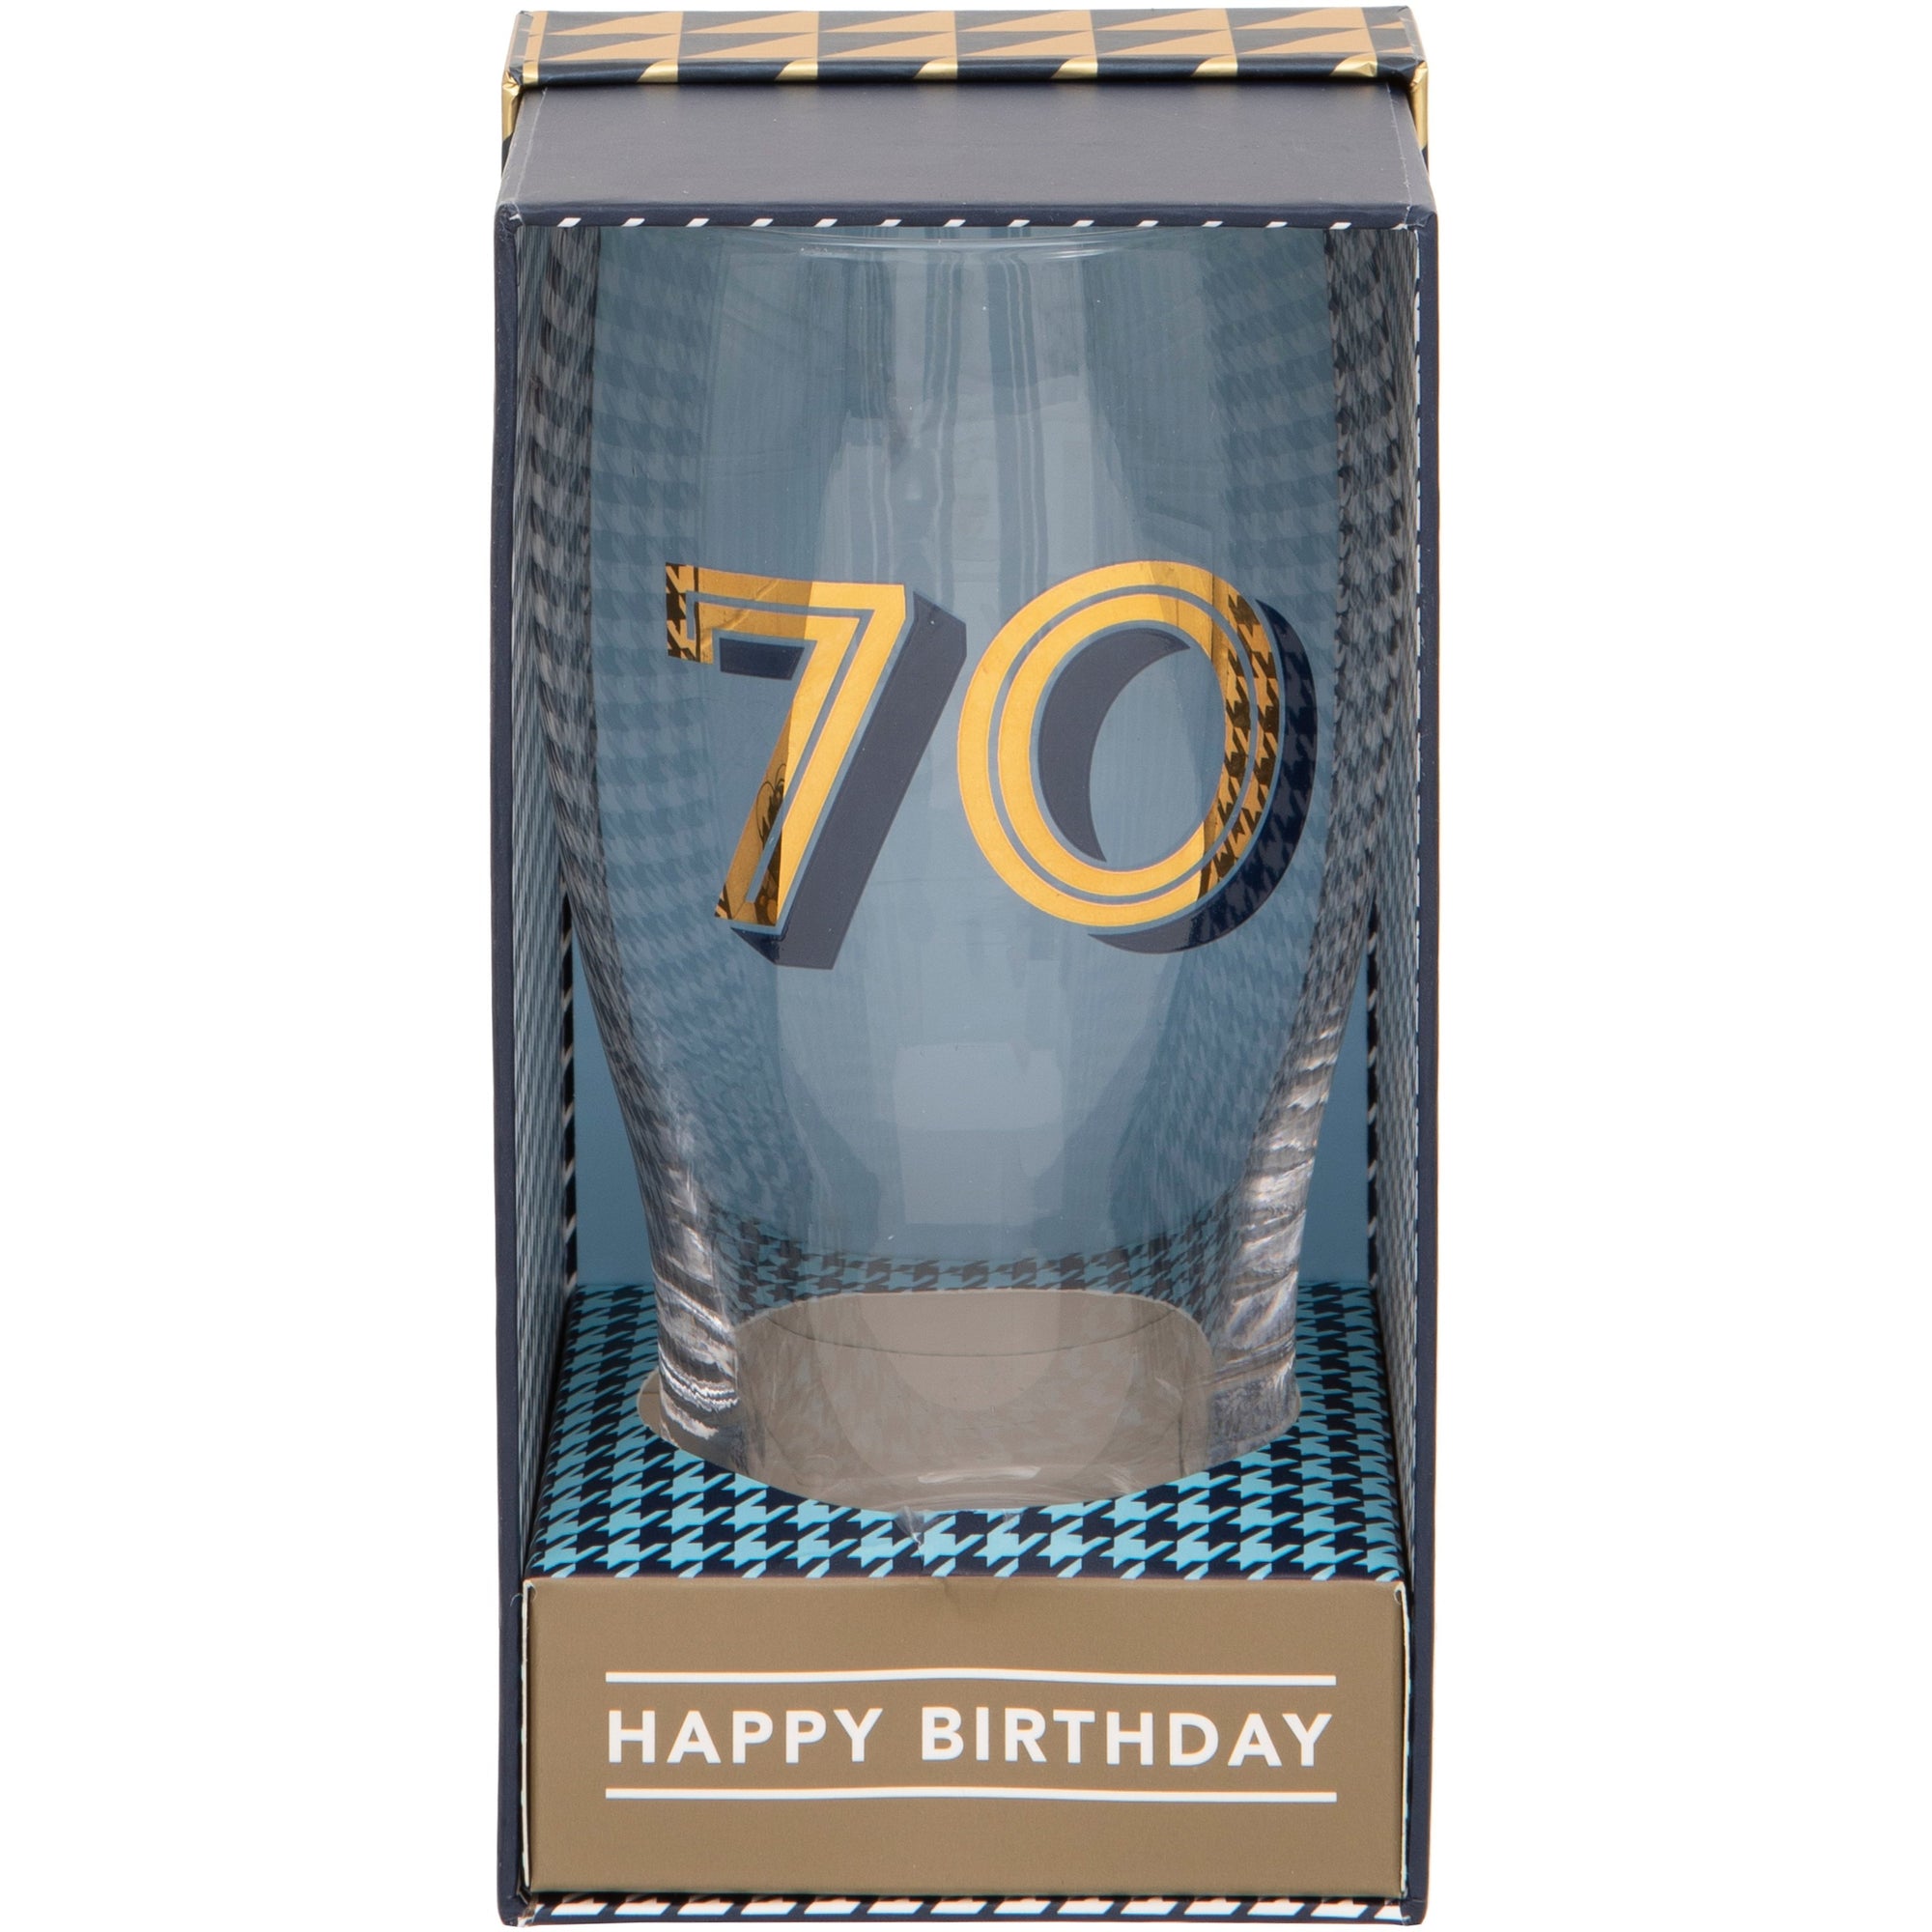 Gold Collection 70th Birthday Beer Pint Glass